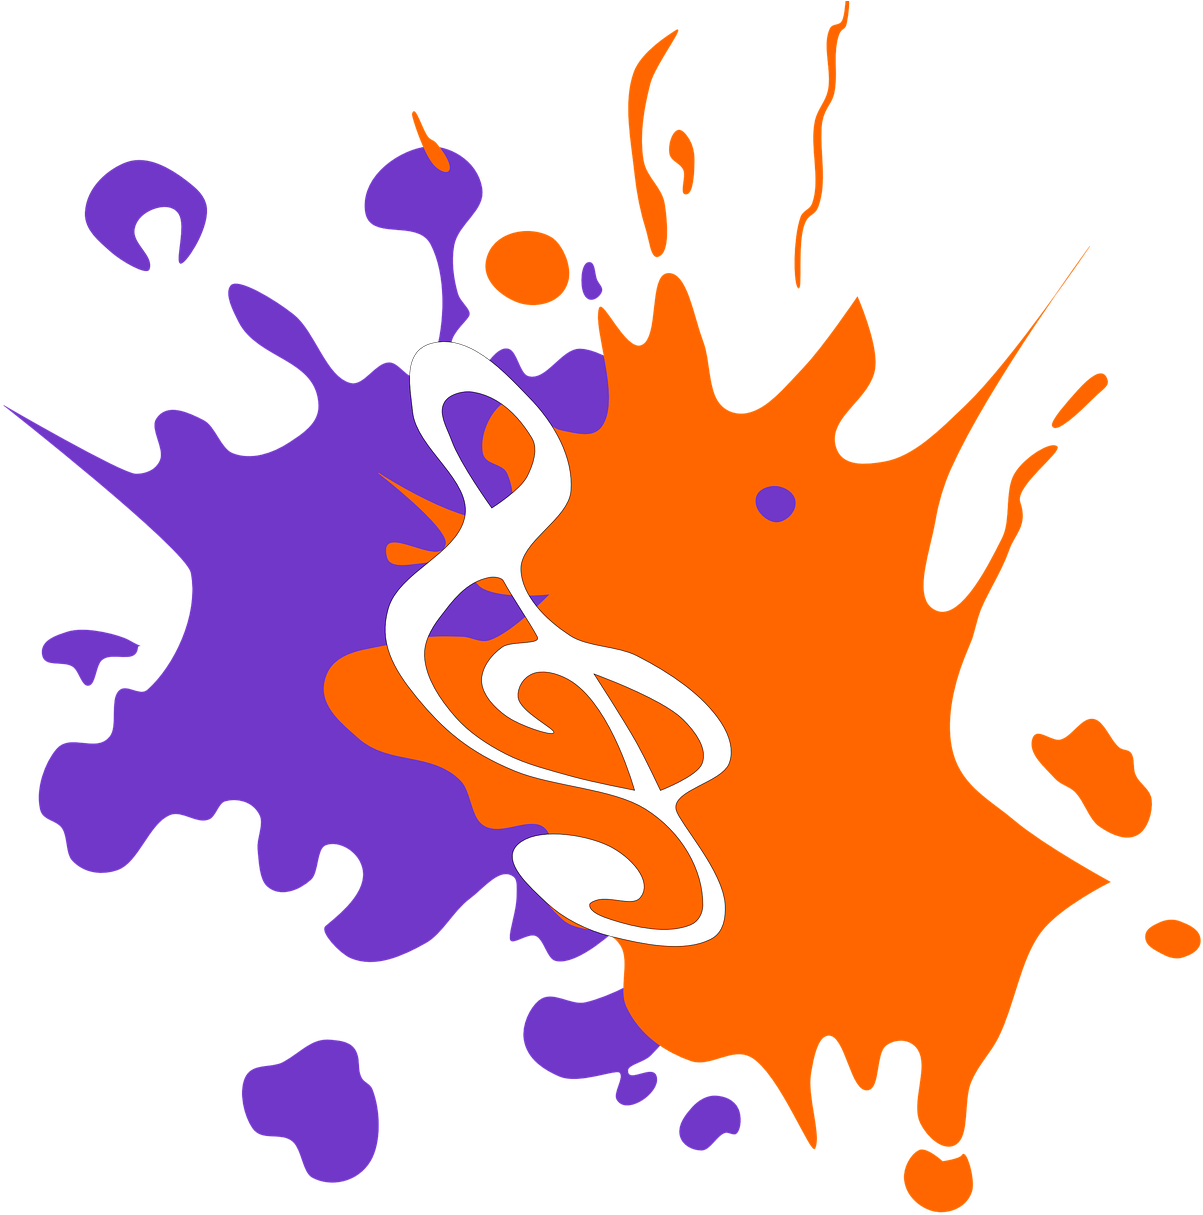 Colorful Musical Splash Graphic PNG